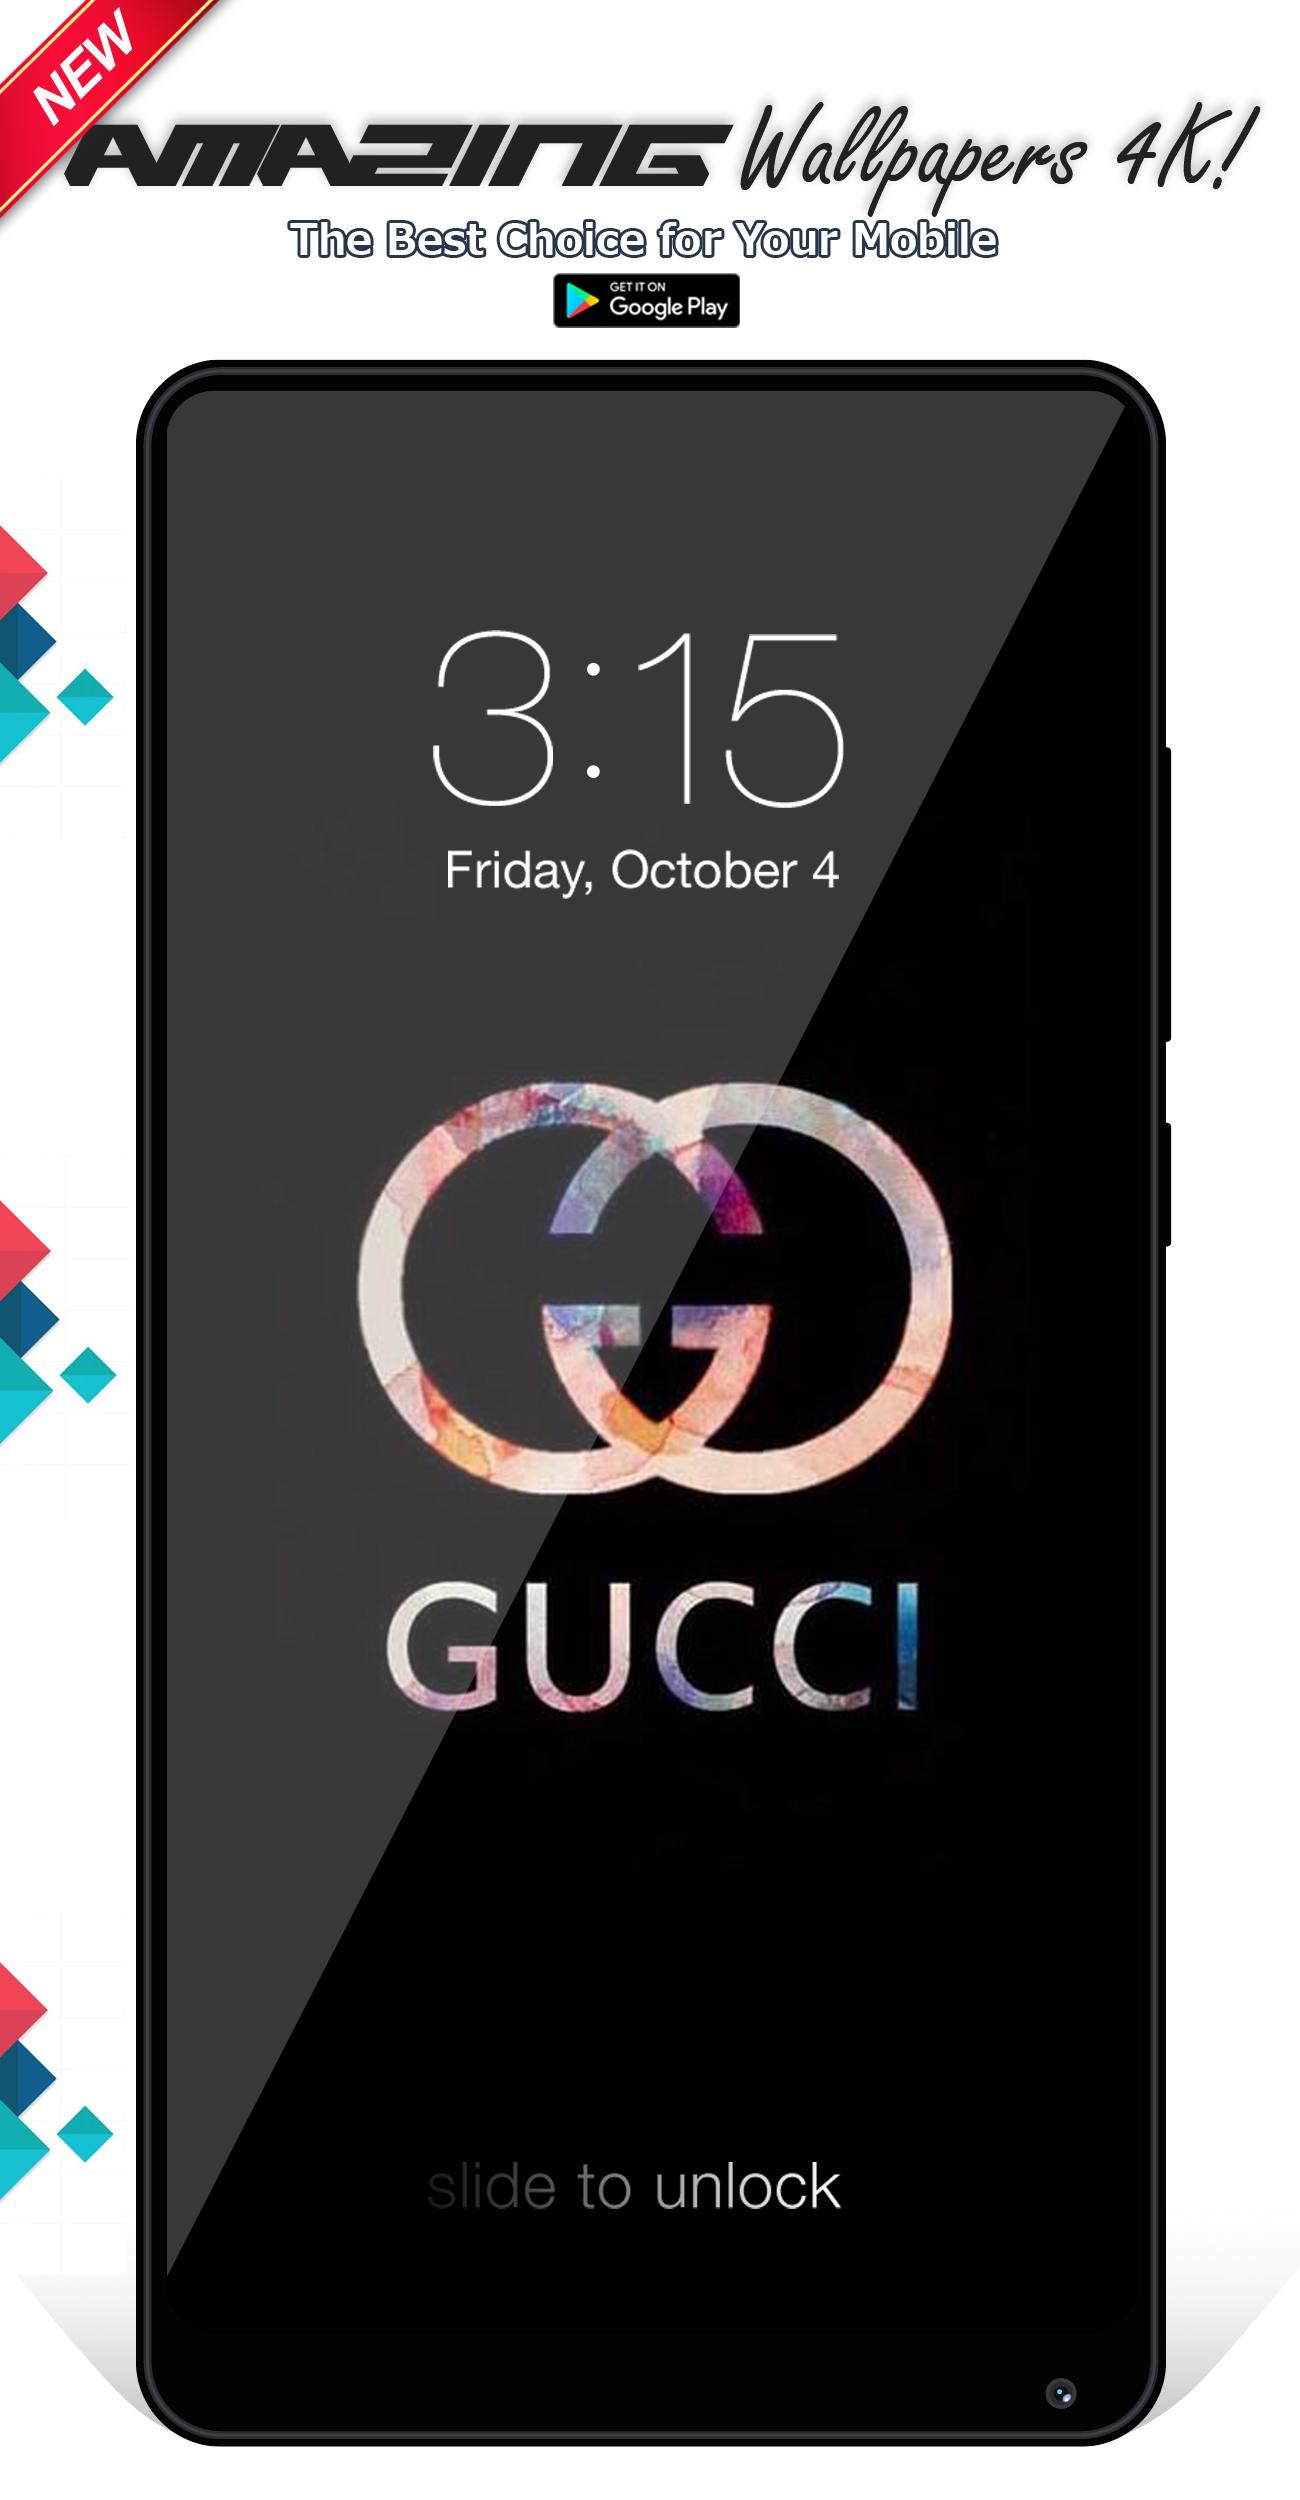 Gucci Wallpapers for Android - APK Download